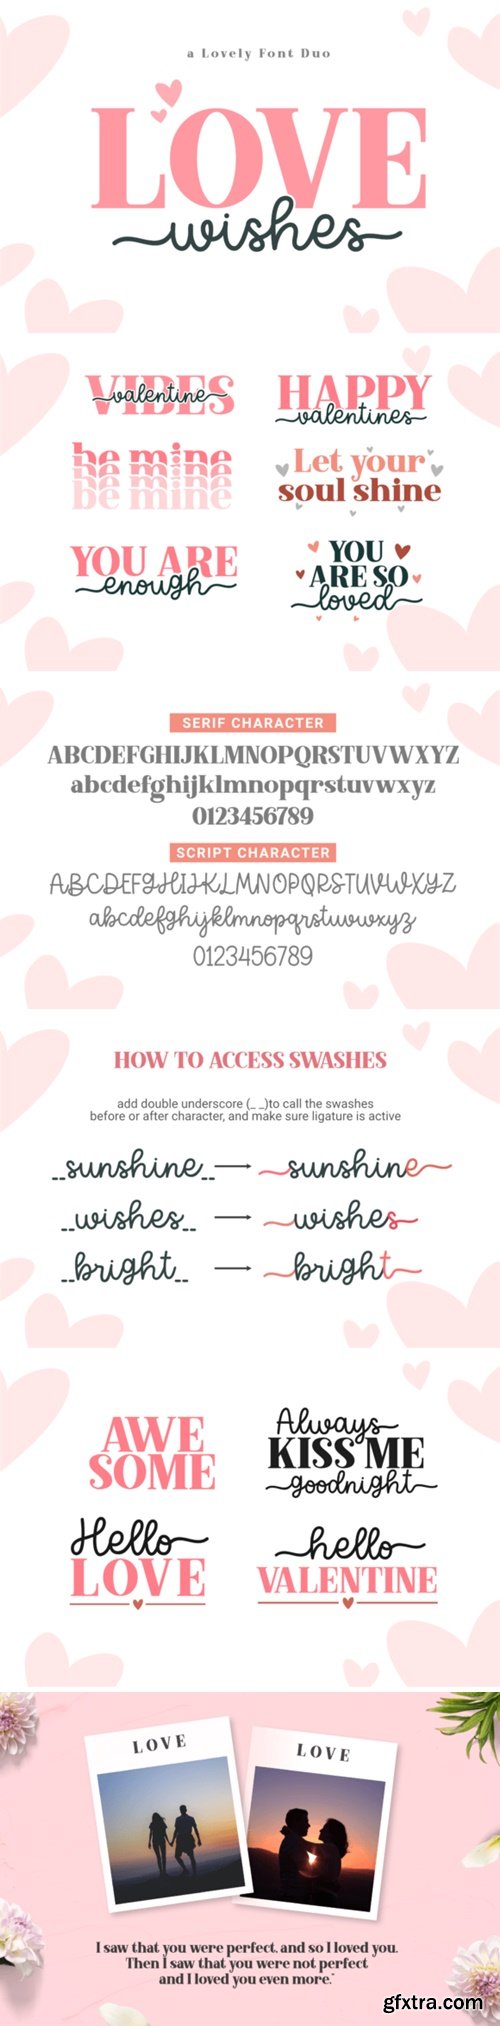 Love Wishes Duo Font